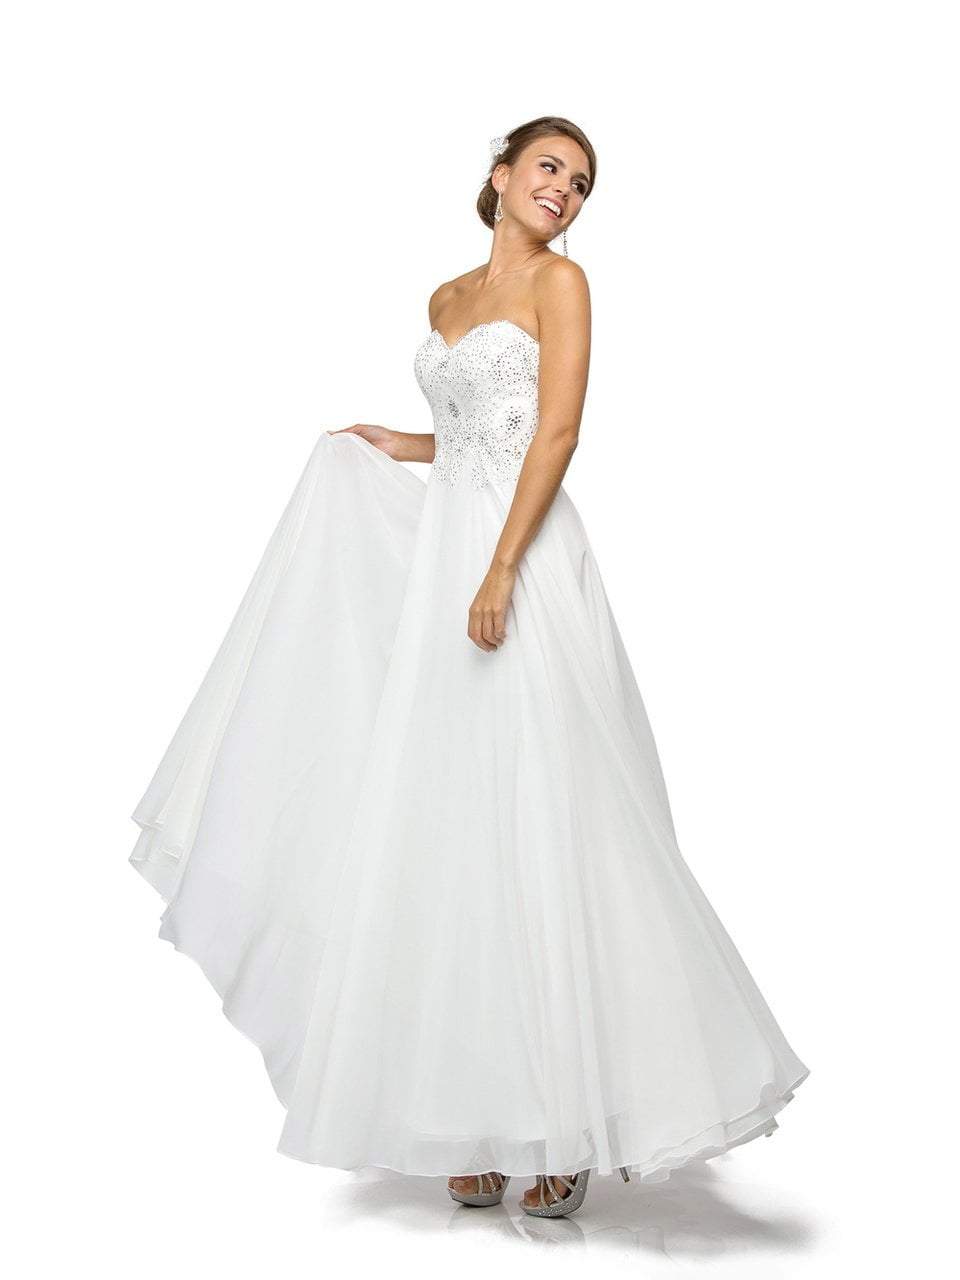 Dancing Queen Bridal - 9502 Stunning Bead Encrusted Sweetheart Chiffon Ball Gown Special Occasion Dress